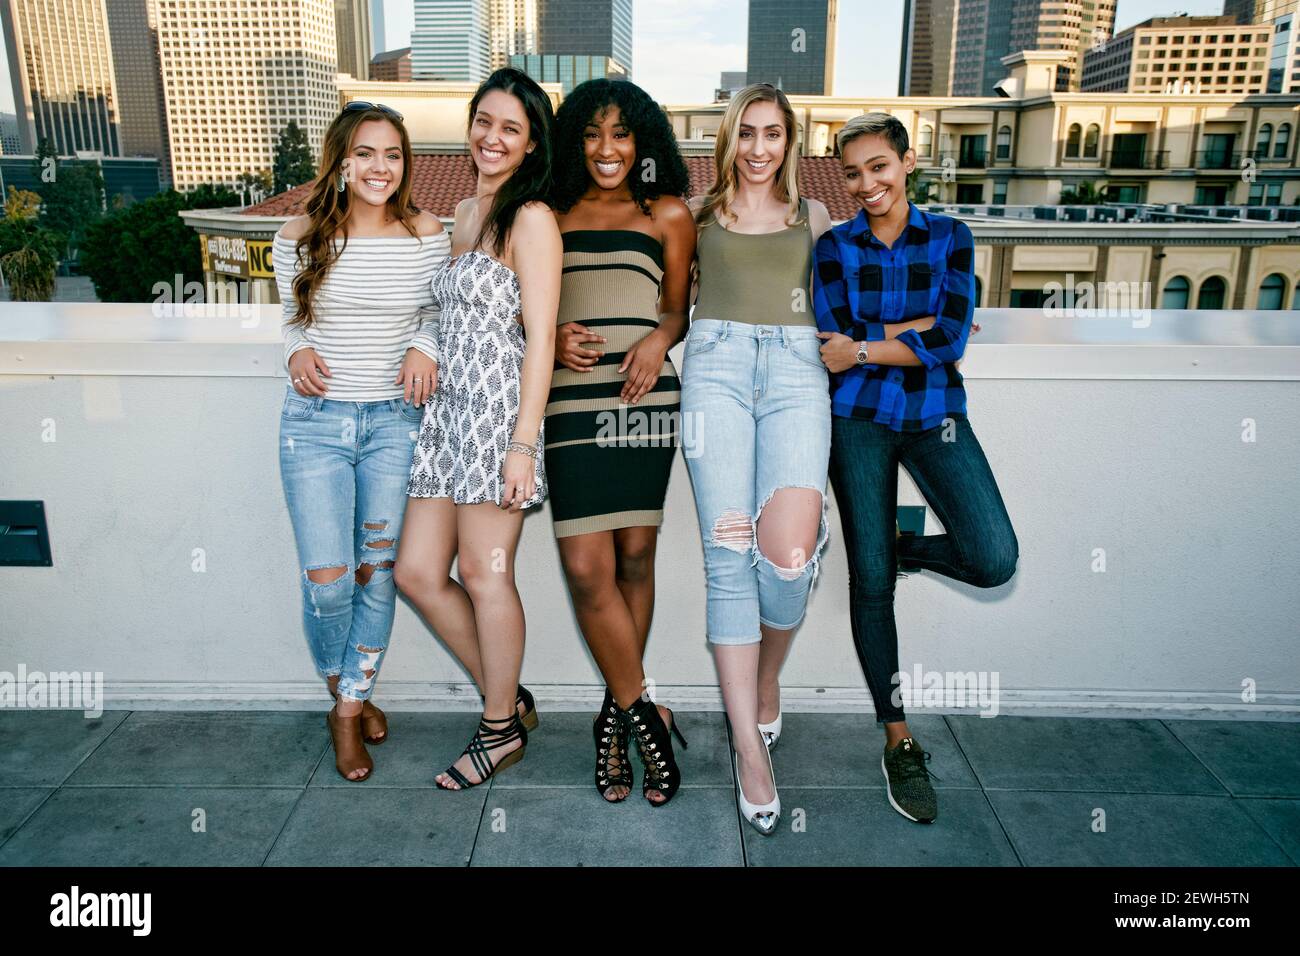 Five young women posing for photographs on a rooftop, city skyline background Stock Photo